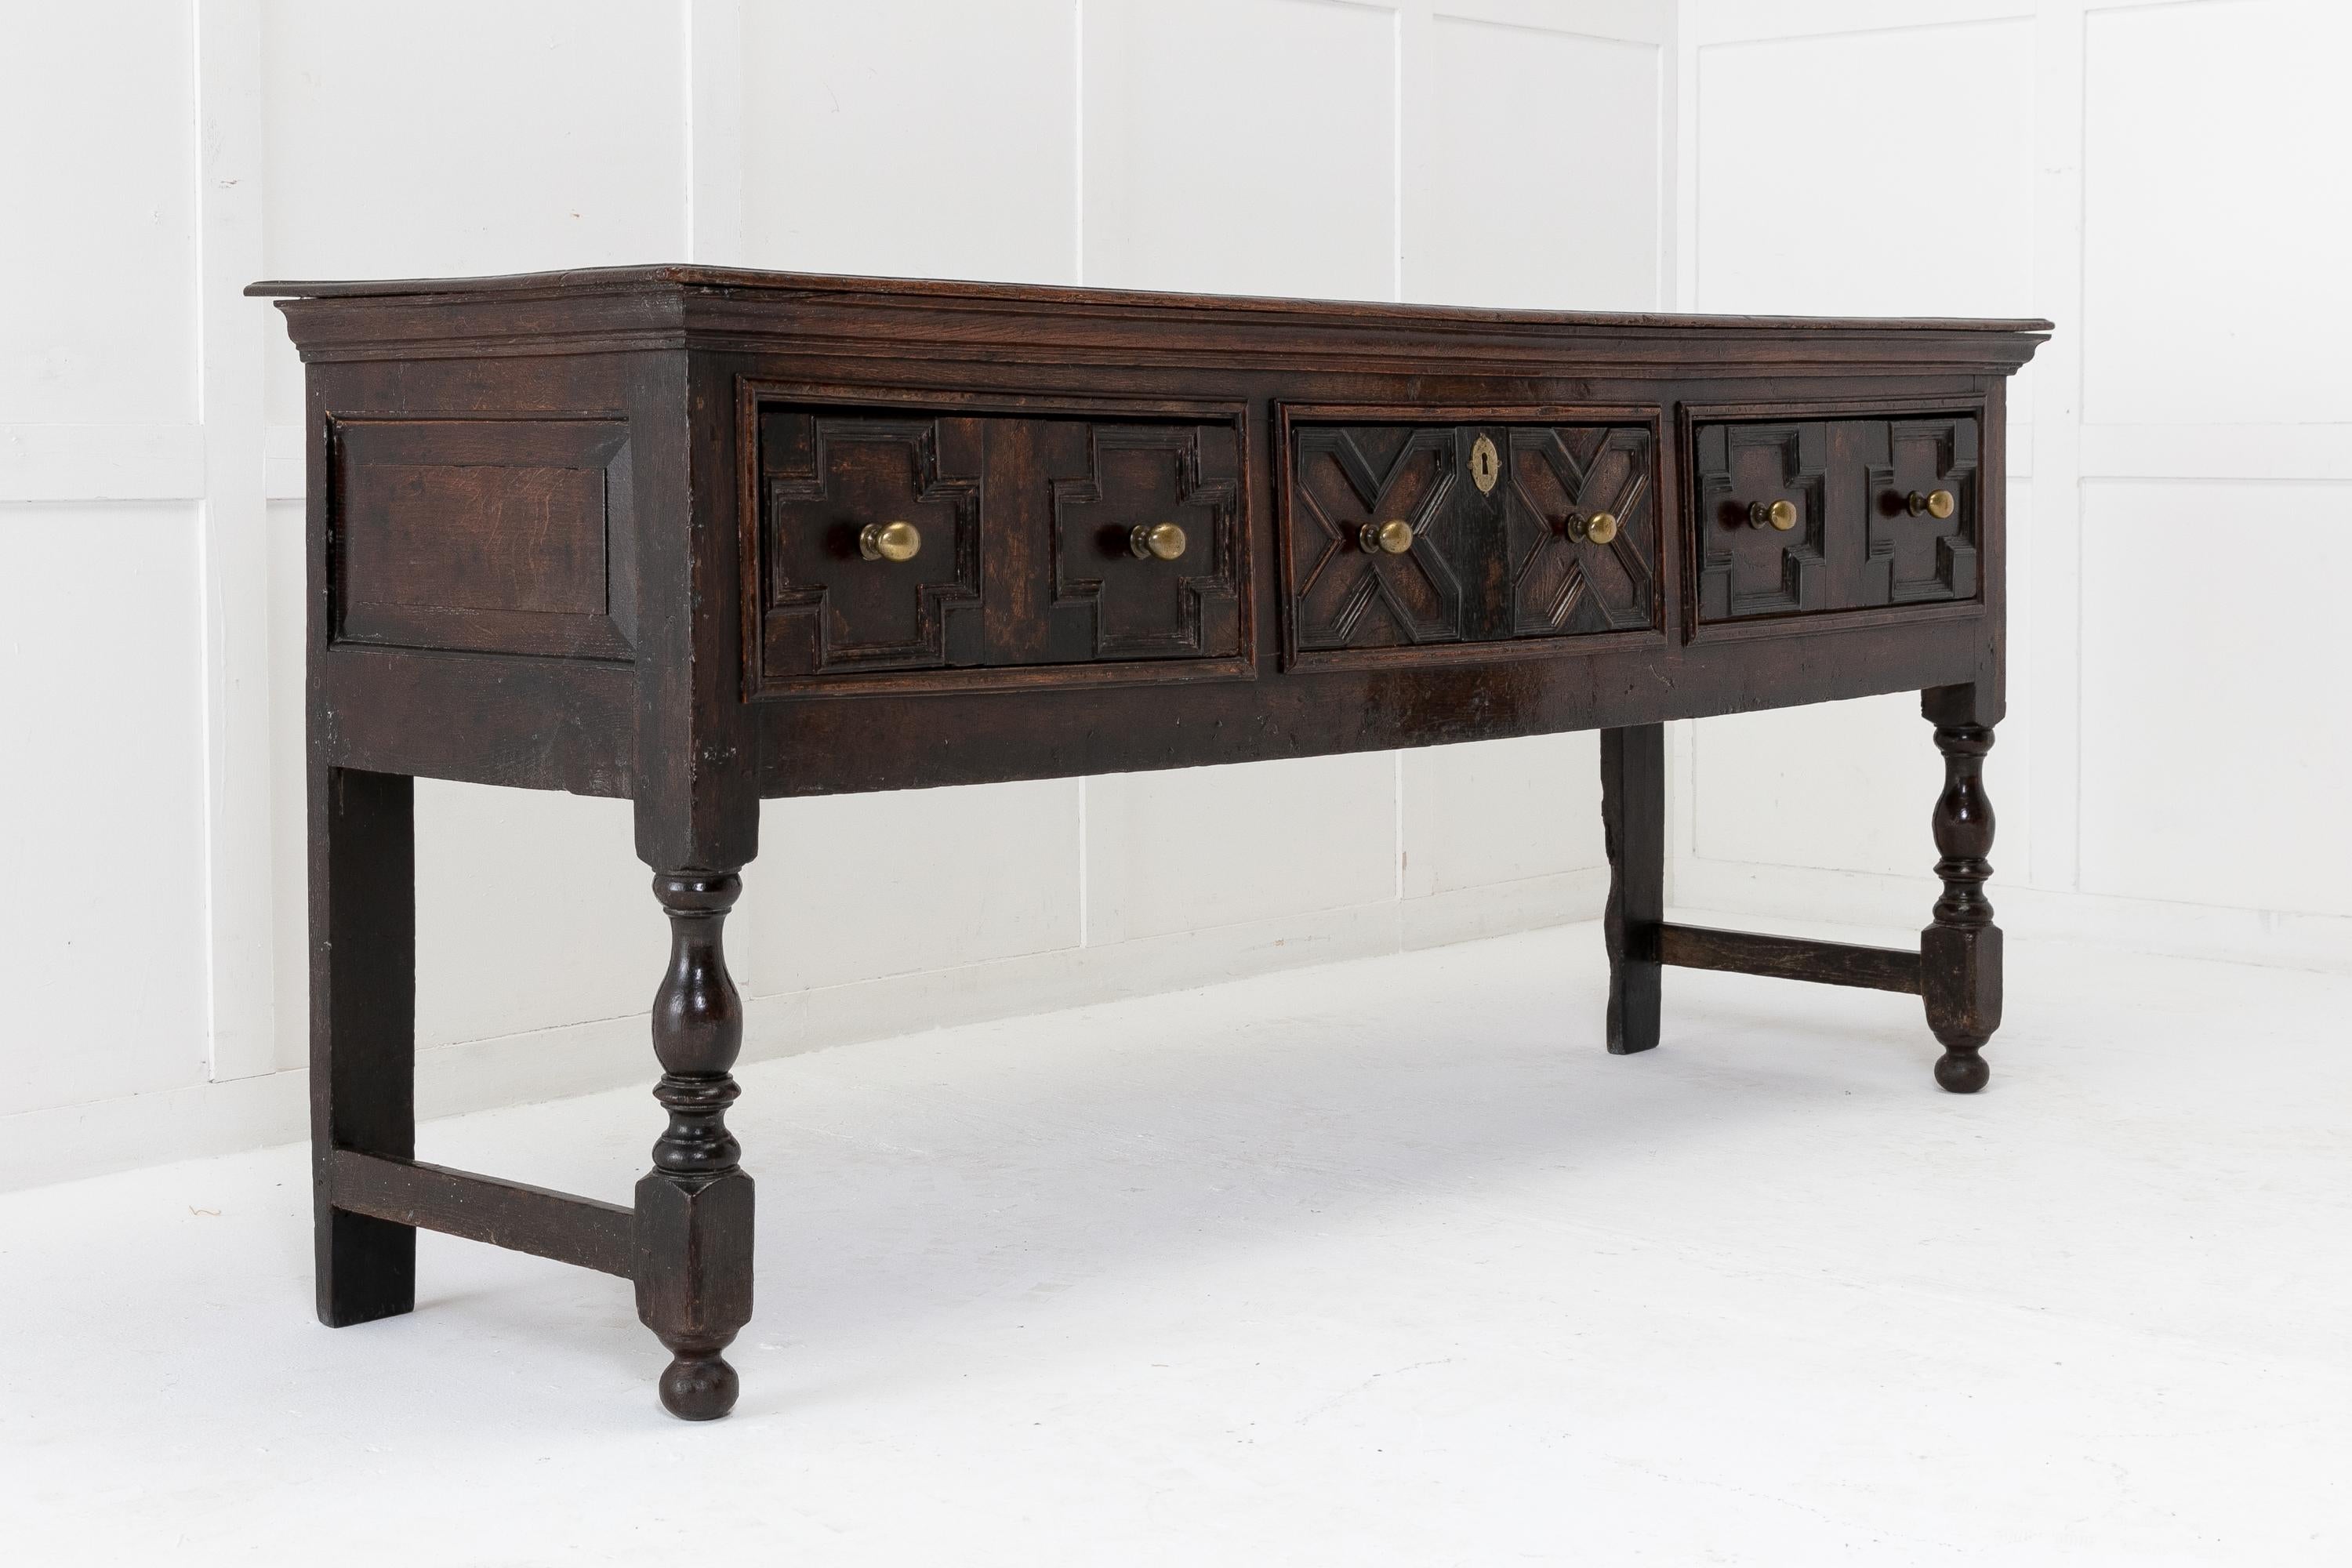 A very nicely proportioned 17th Century oak dresser base having a moulded edge top and three deep drawers below. The drawers have nice geometric carved patterns, and brass handles. The sides have deep fielded panels. Raised on squared back legs and